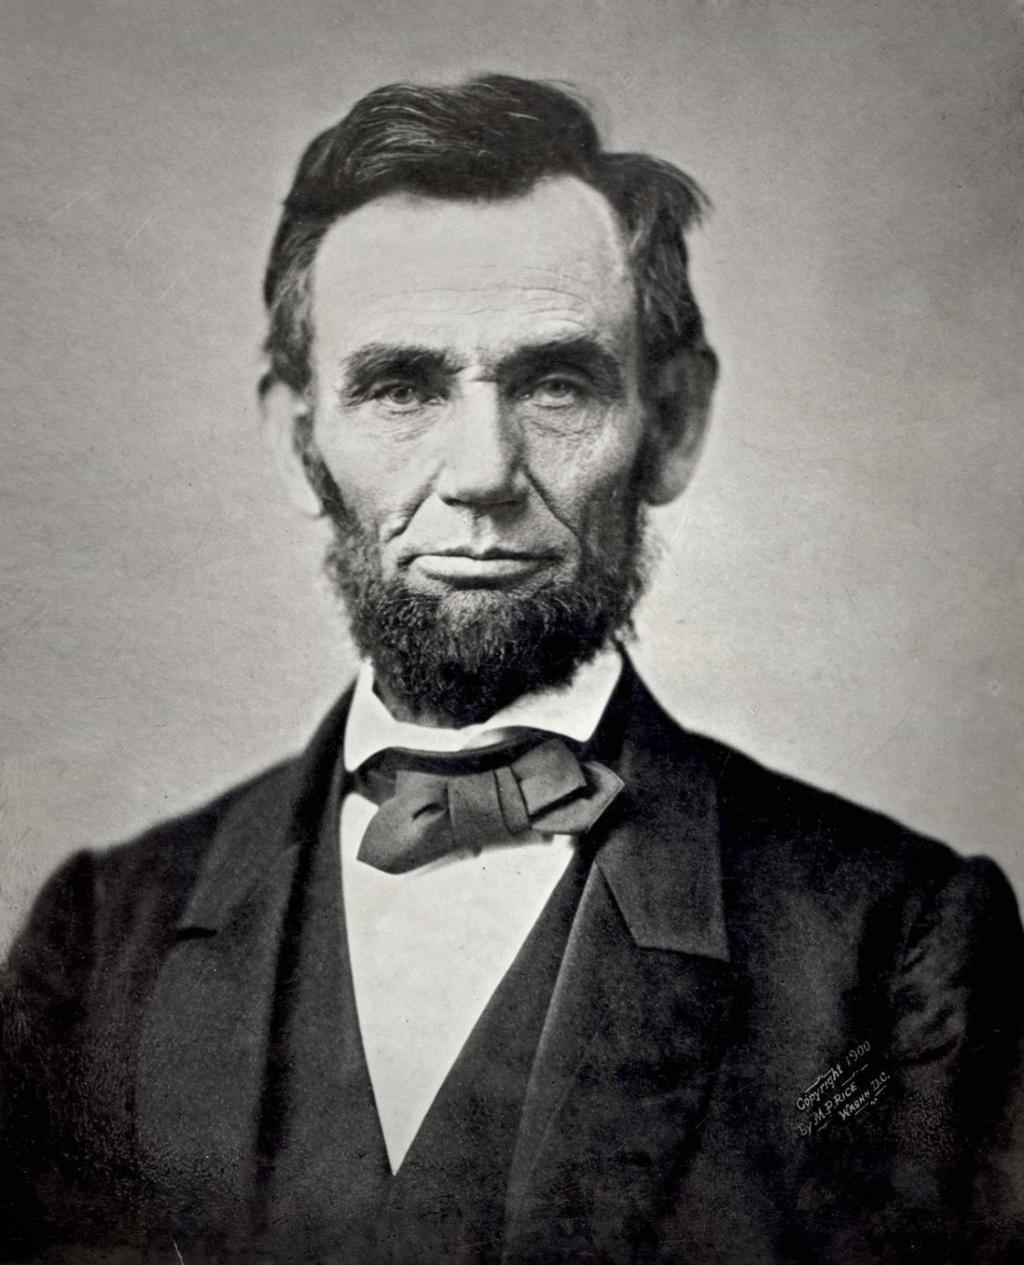 1863 Four score and seven years ago our fathers brought forth on this continent a new nation, conceived in liberty and